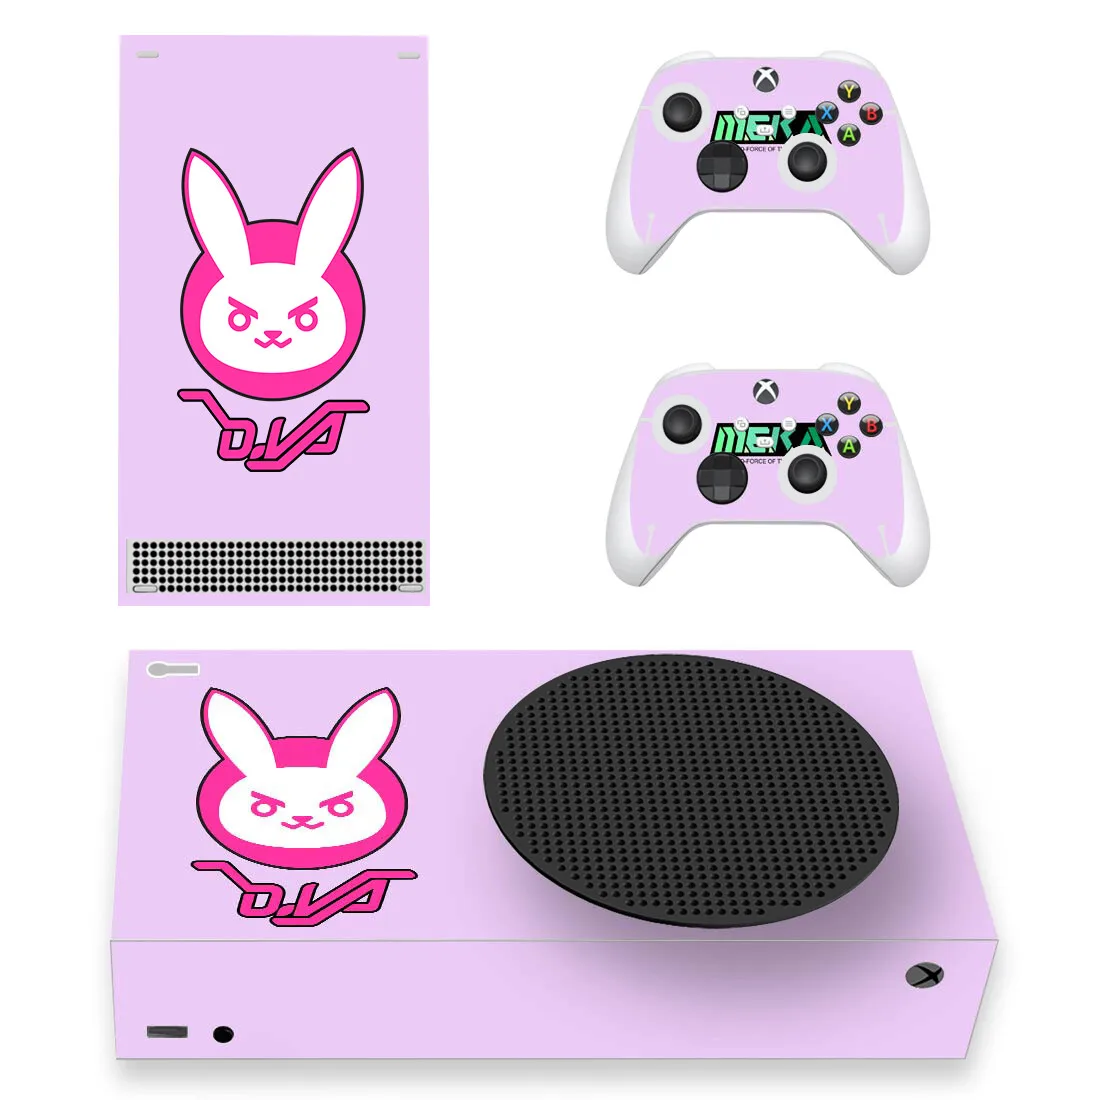 New Game DVA Film Skin Sticker Decal Cover for Xbox Series S Console and 2 Controllers Xbox Series Slim XSS Skin Sticker Vinyl